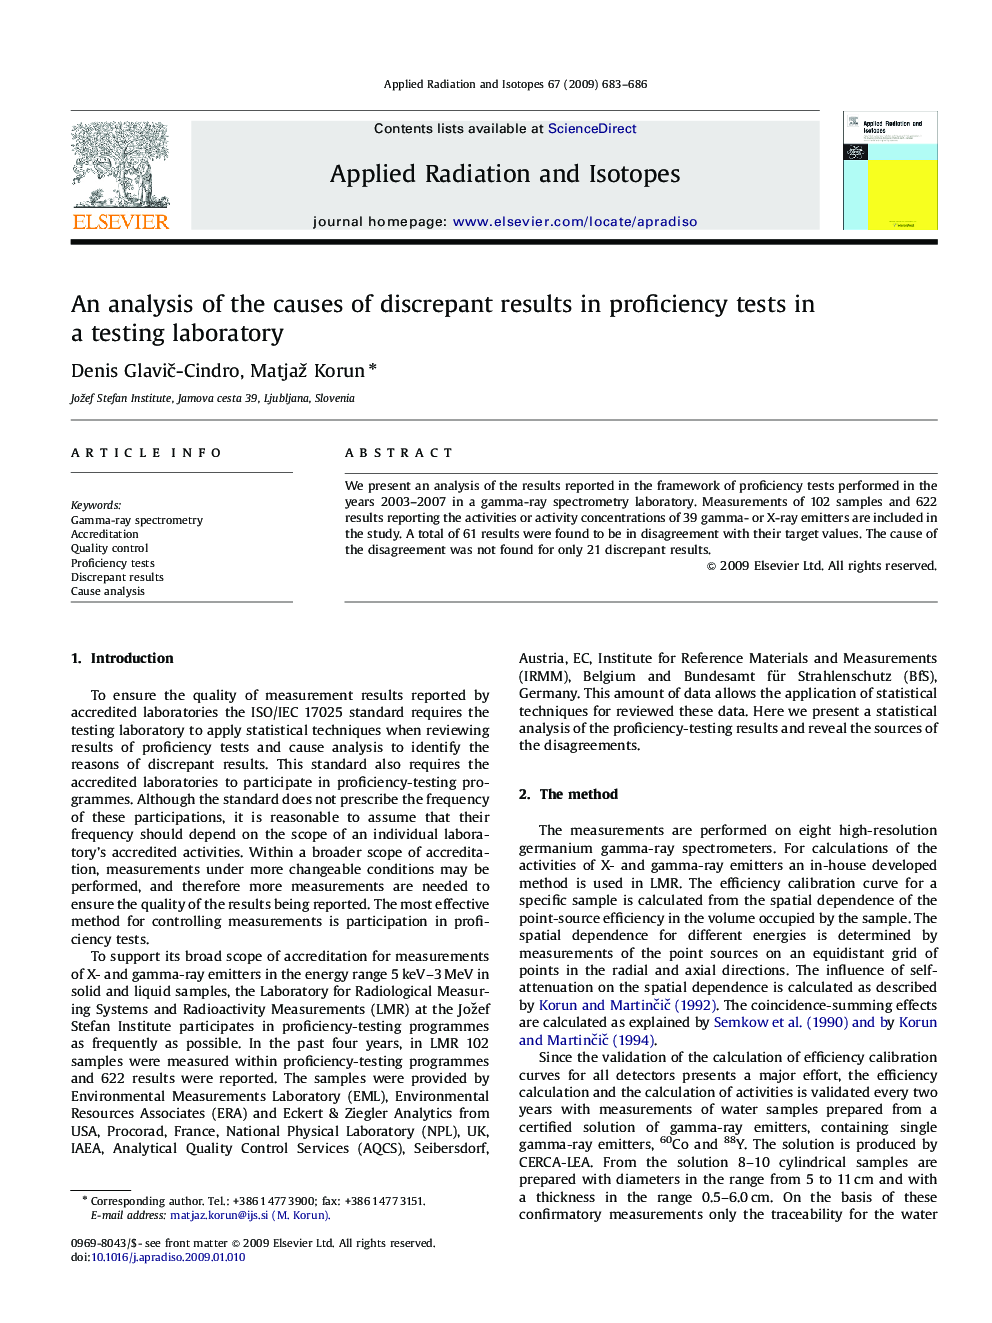 An analysis of the causes of discrepant results in proficiency tests in a testing laboratory